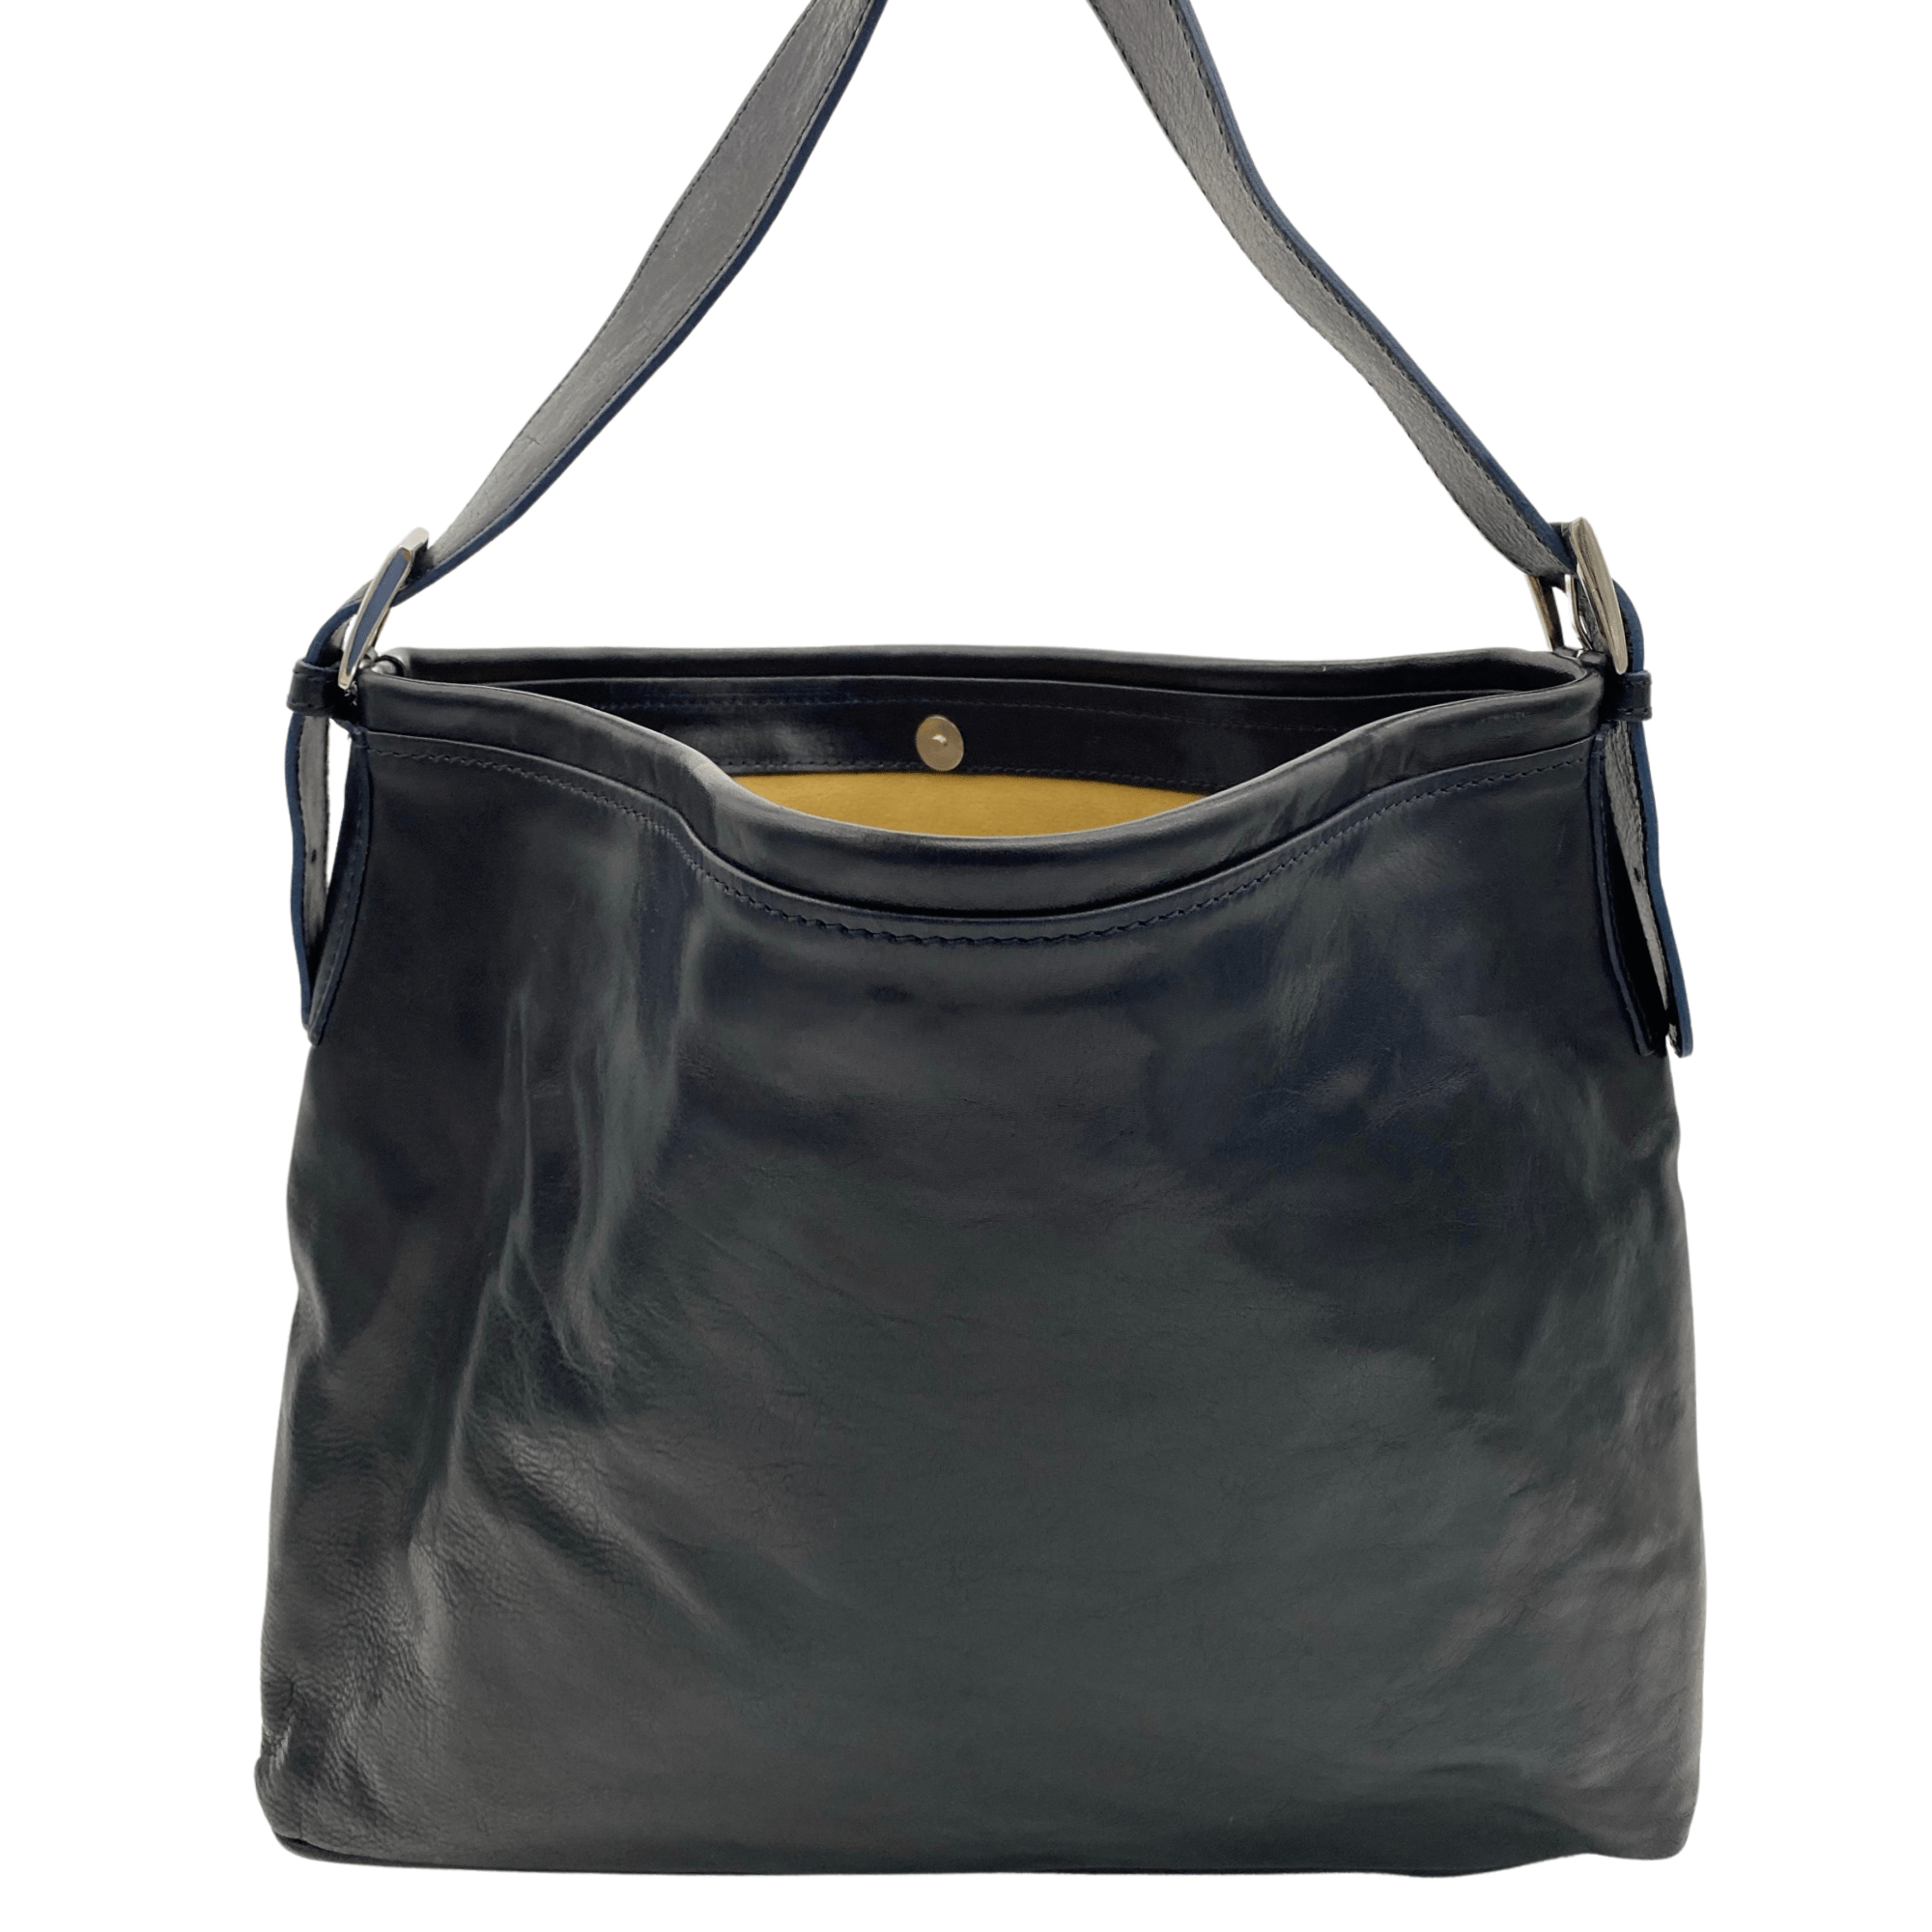 Merci Marie Extra Large Shoulder Bag - Dark Navy New w/out Tags